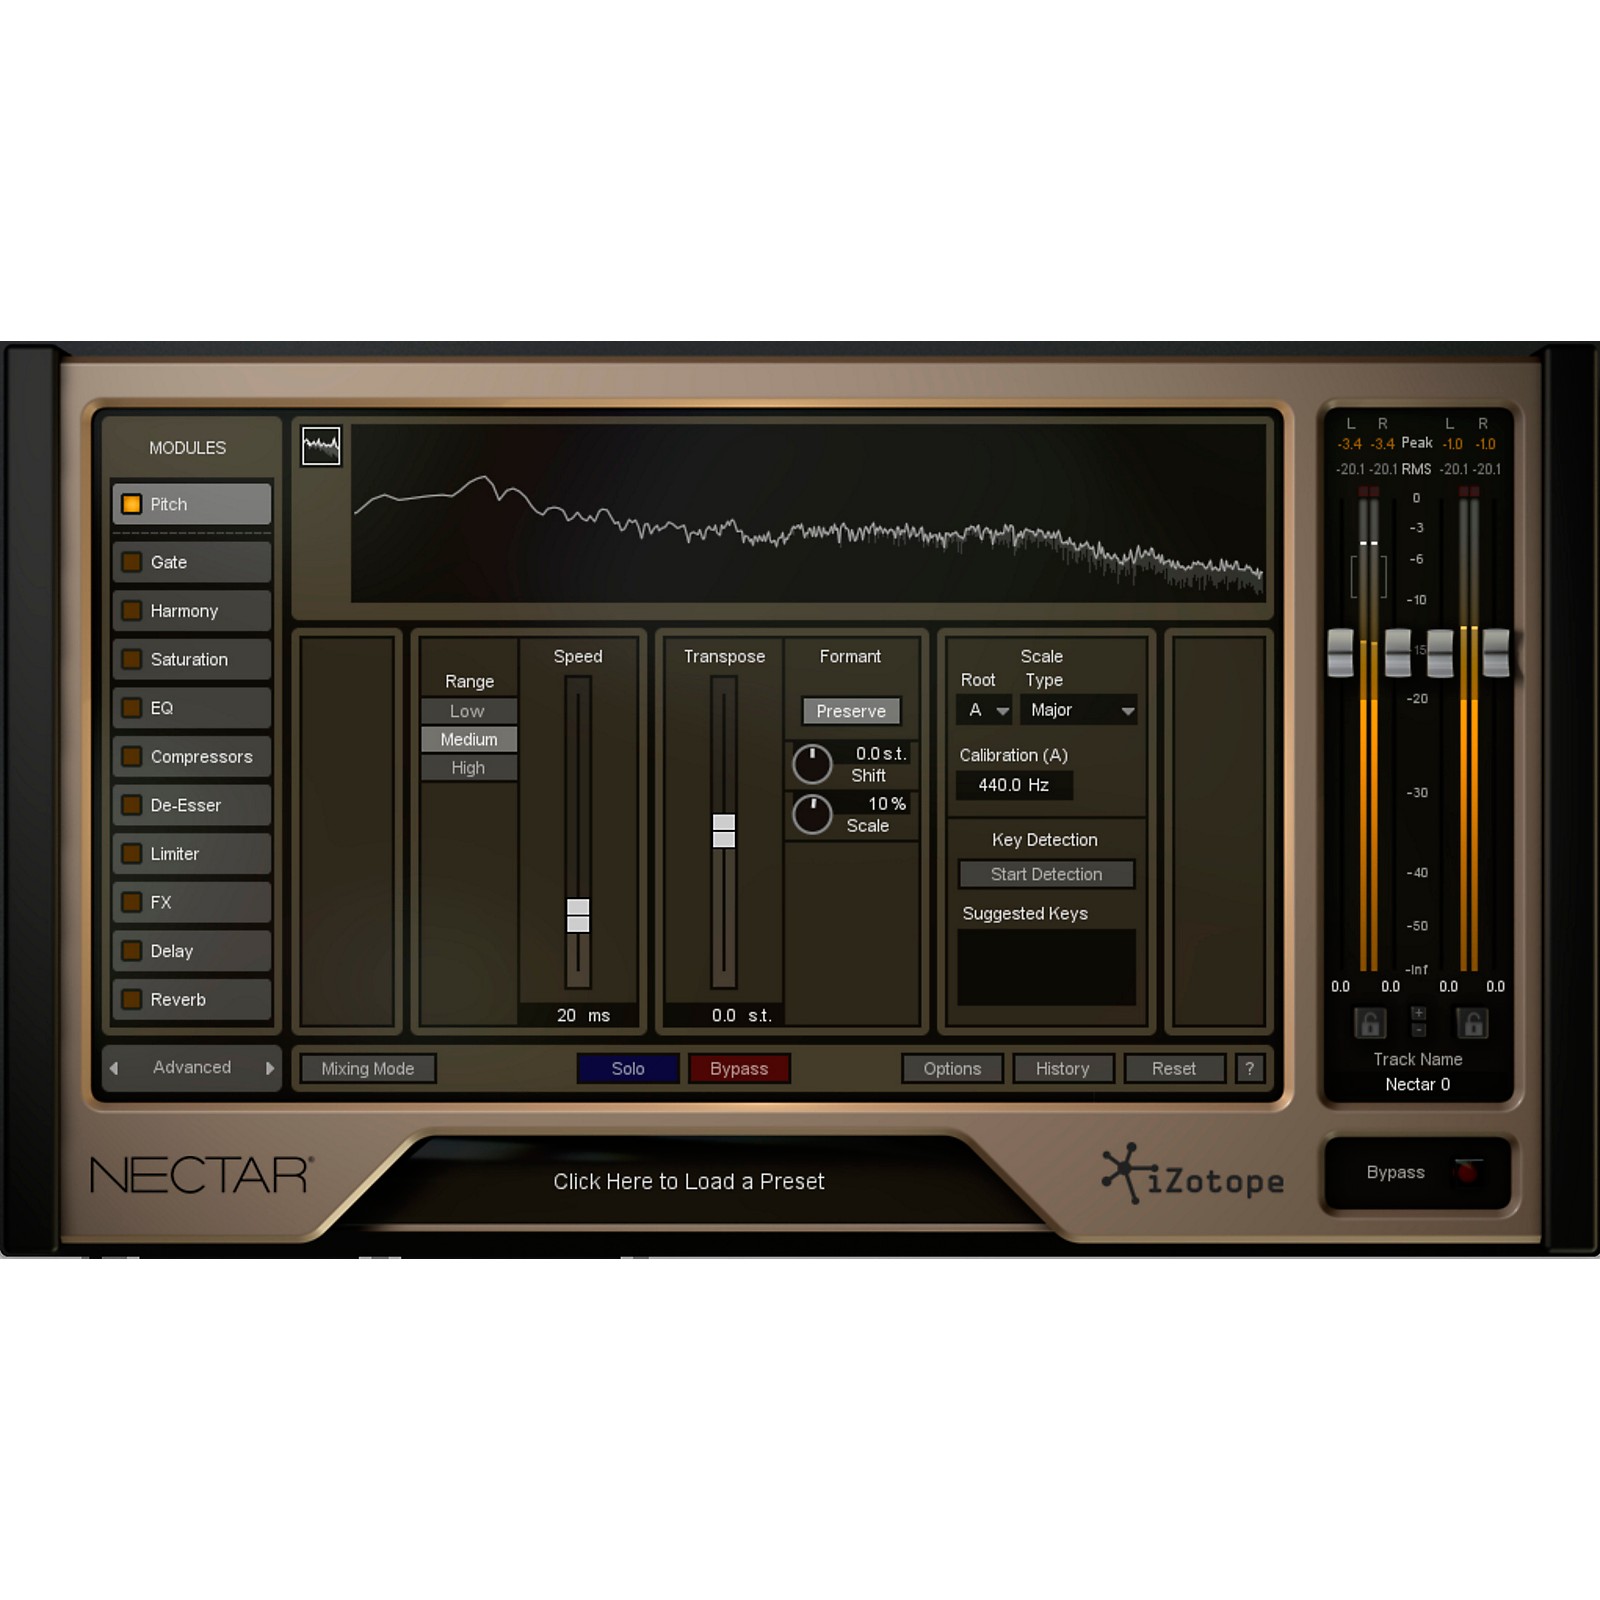 izotope nectar 2 production suite